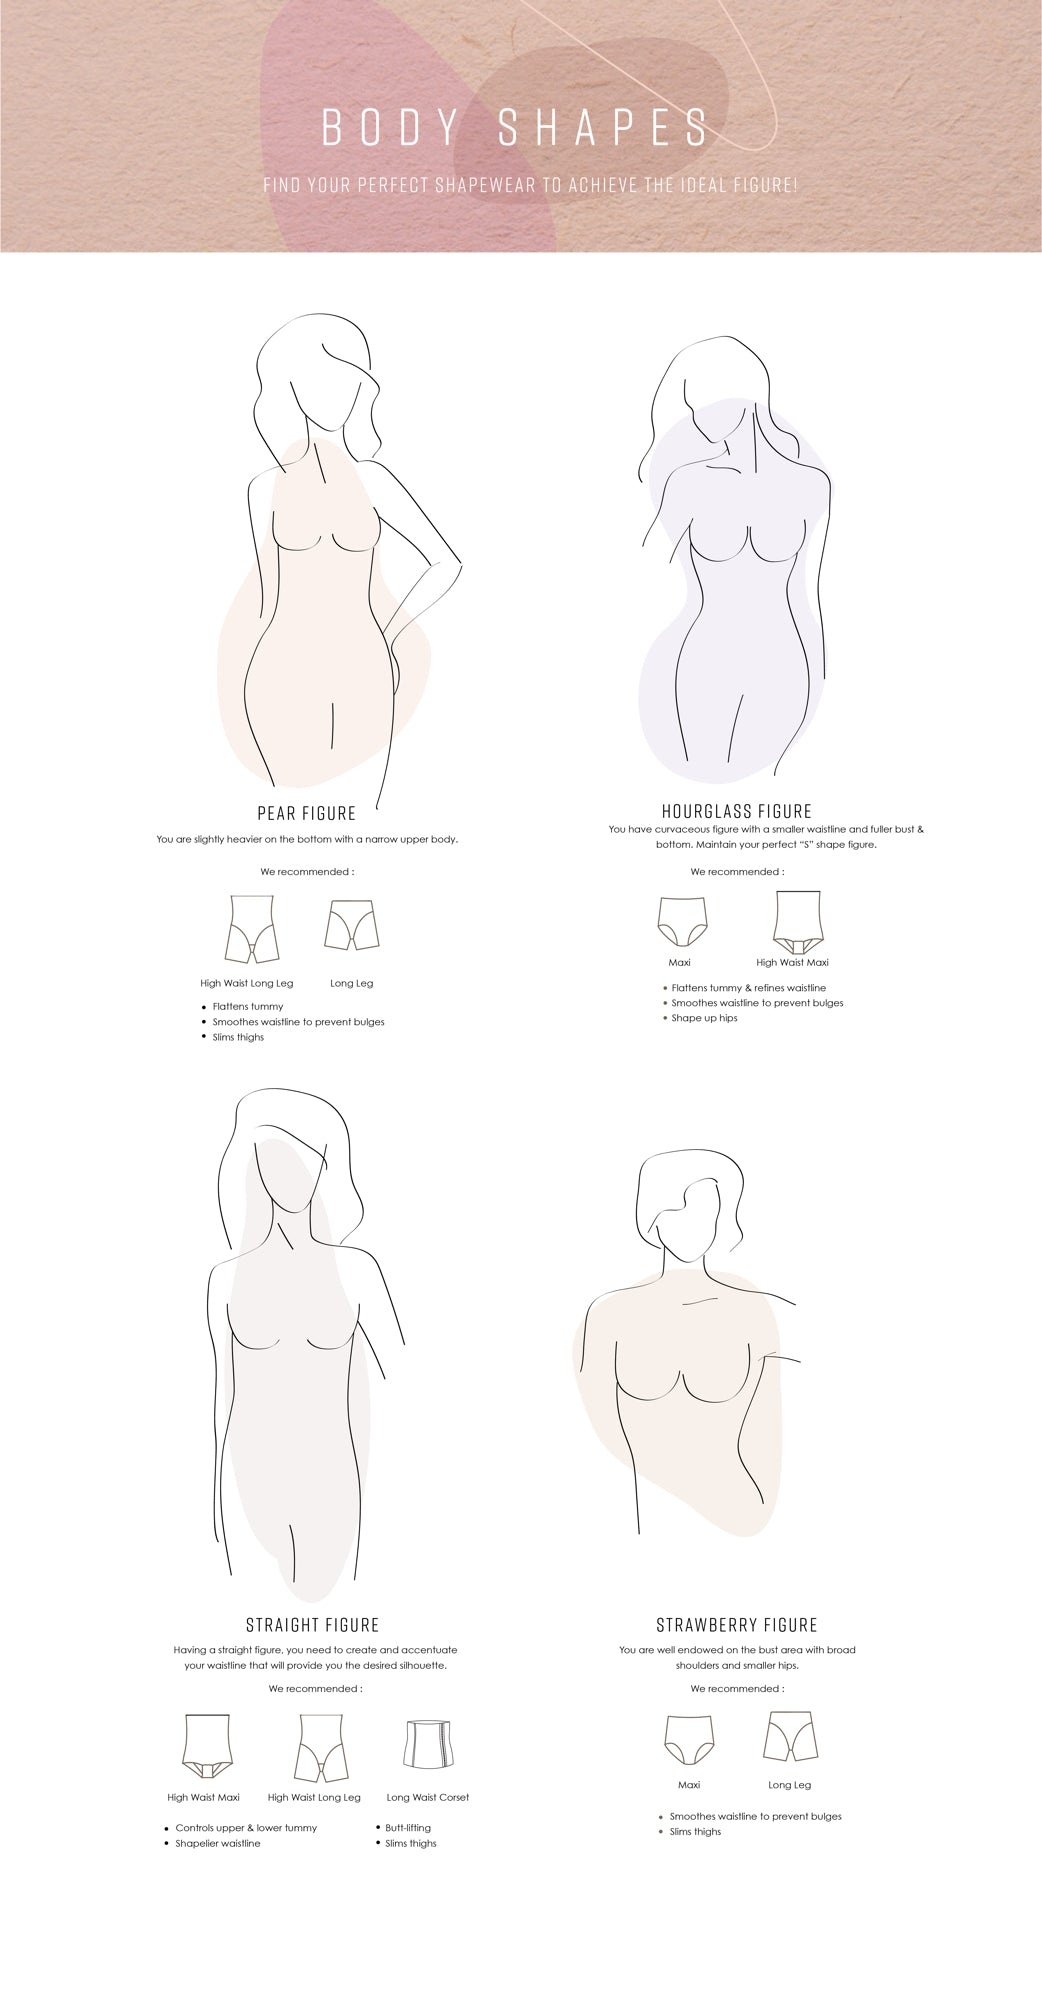 How to find out your body shape with 2 easy steps - Her World Singapore